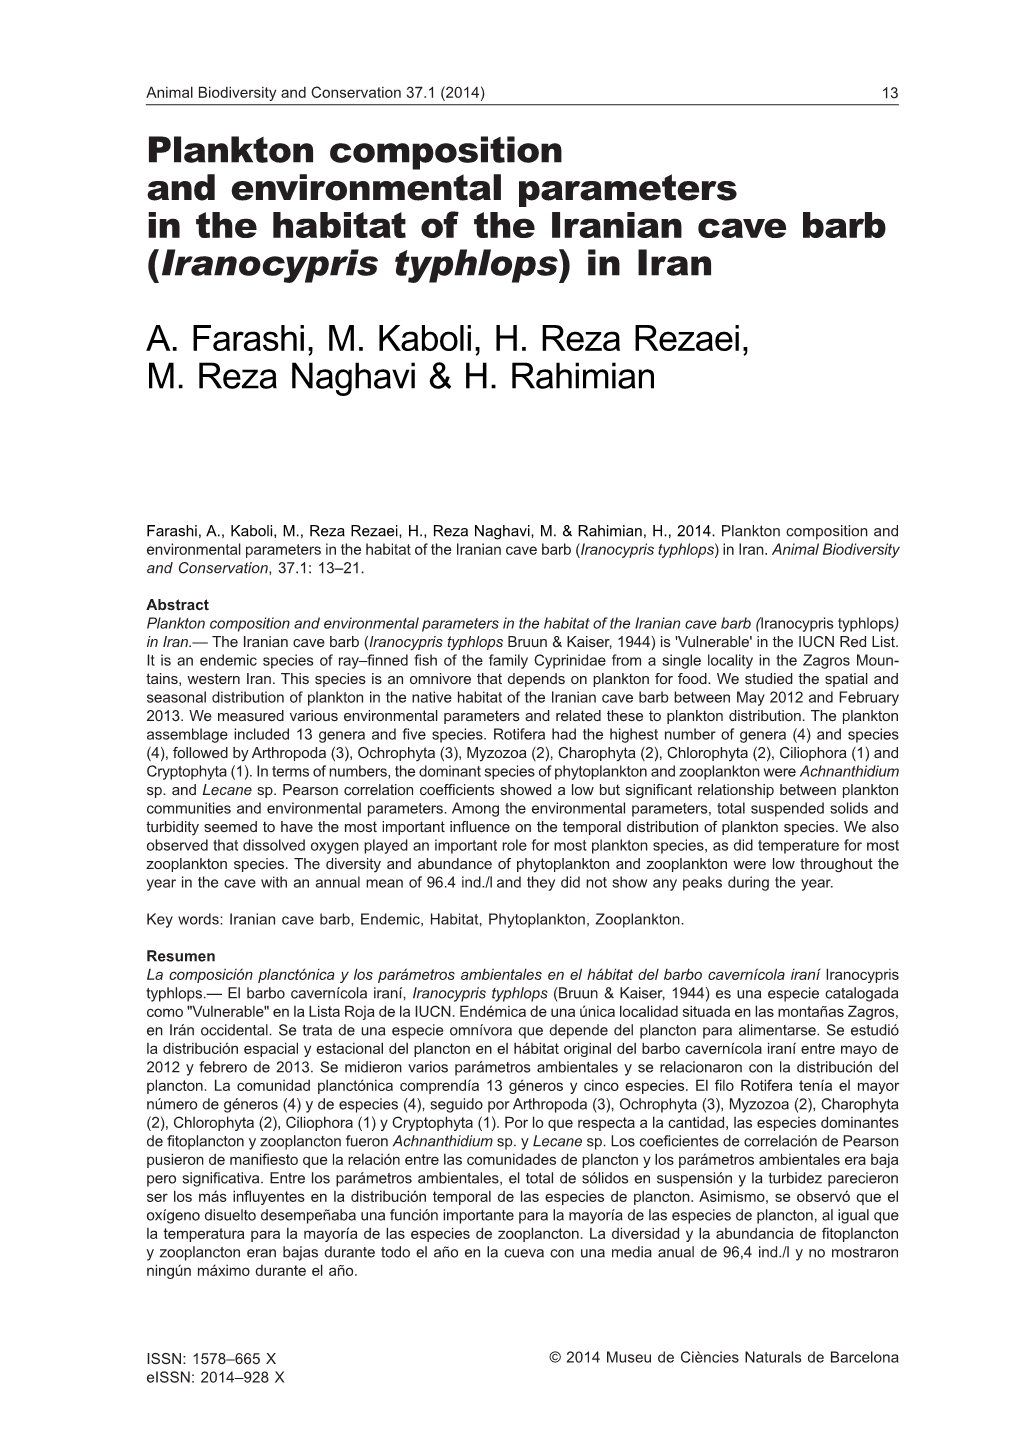 Plankton Composition and Environmental Parameters in the Habitat of the Iranian Cave Barb (Iranocypris Typhlops) in Iran